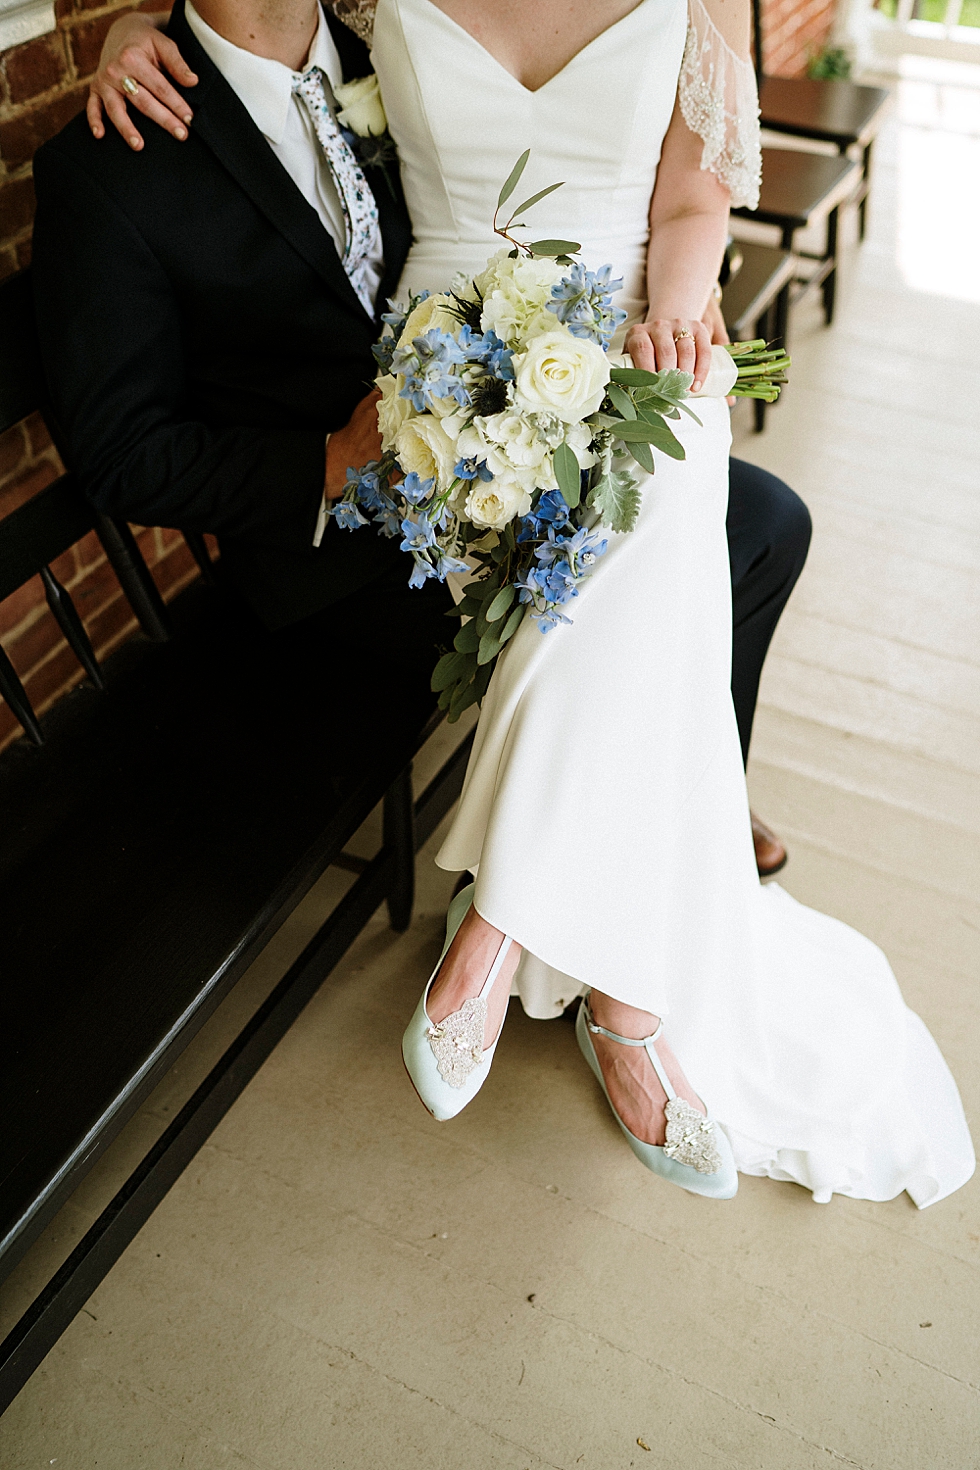  Lovely handpicked flowers for this southern spring wedding at the beautiful manor house at Locust Grove. spring wedding dress Locust Grove Louisville photographer Kentucky wedding photography by Lauren outdoor wedding bouquet bride and groom #photog